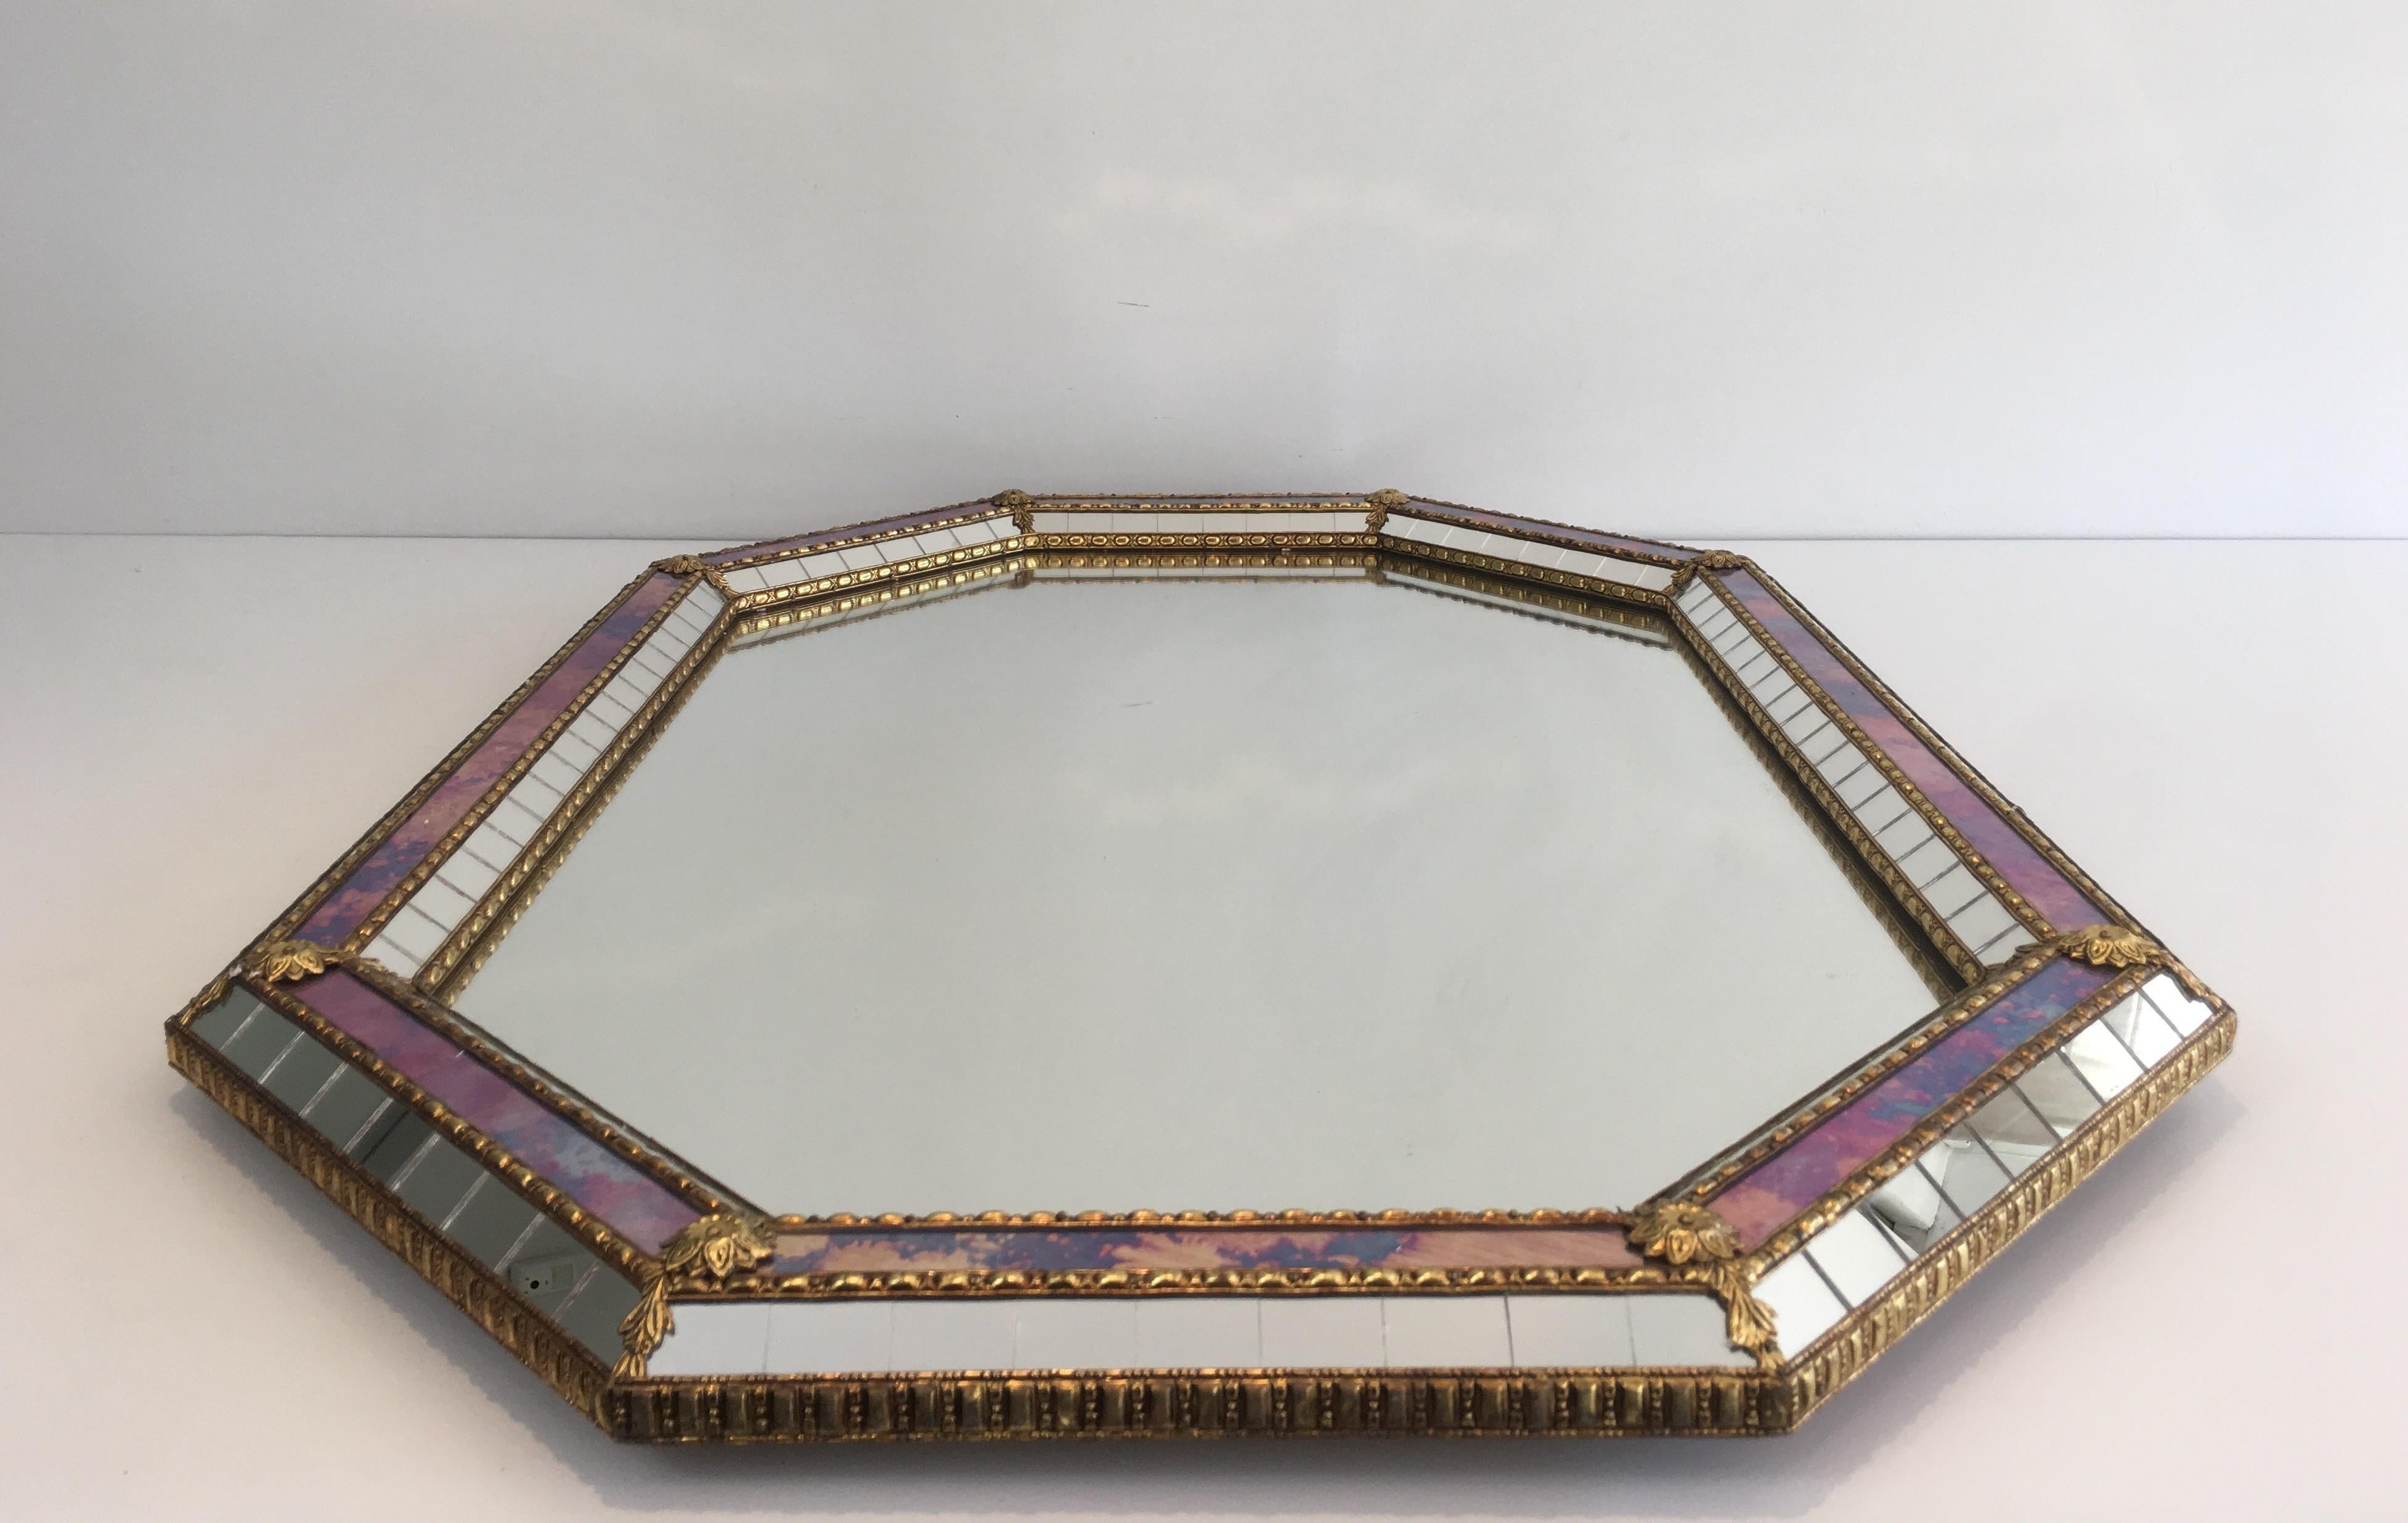 Octogonal Mirror made of Brass Garlands and Flowers and Mirror Faceted, French 14